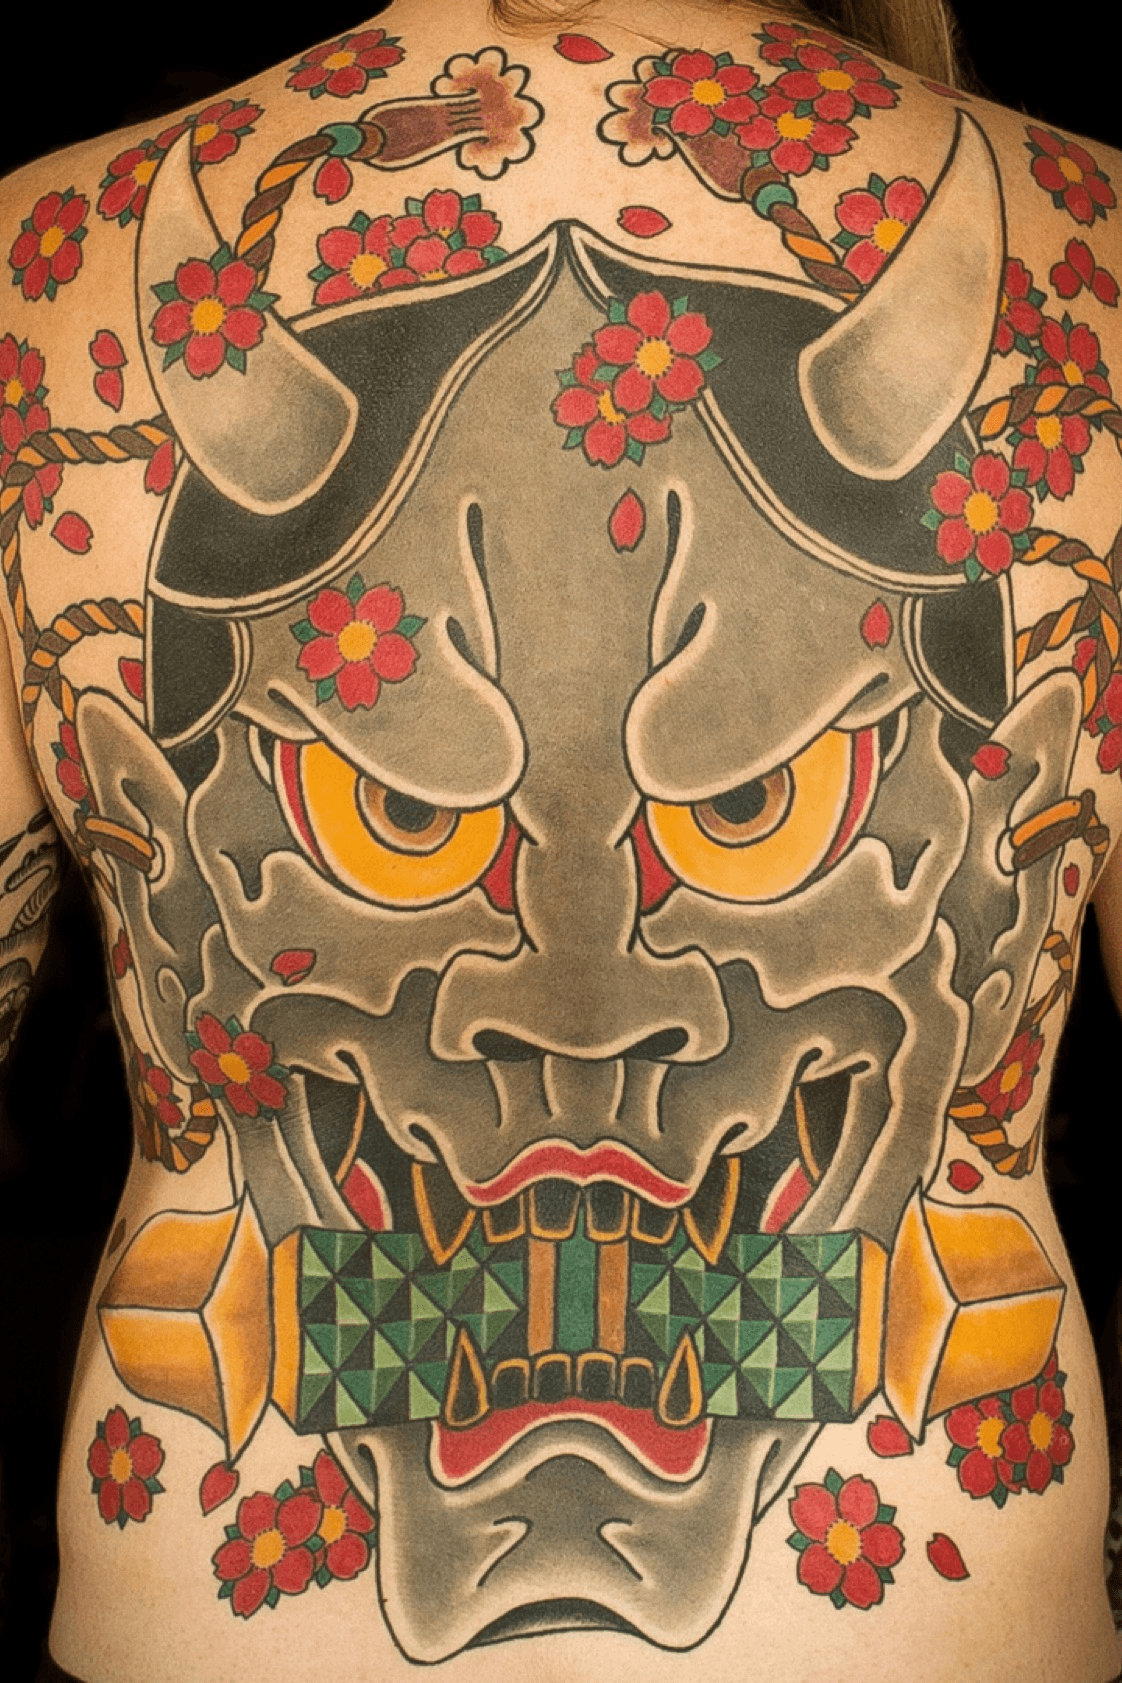 Oni Mask tattoos  what do they mean Oni Mask Tattoos Designs  Symbols   Oni head tattoo meanings